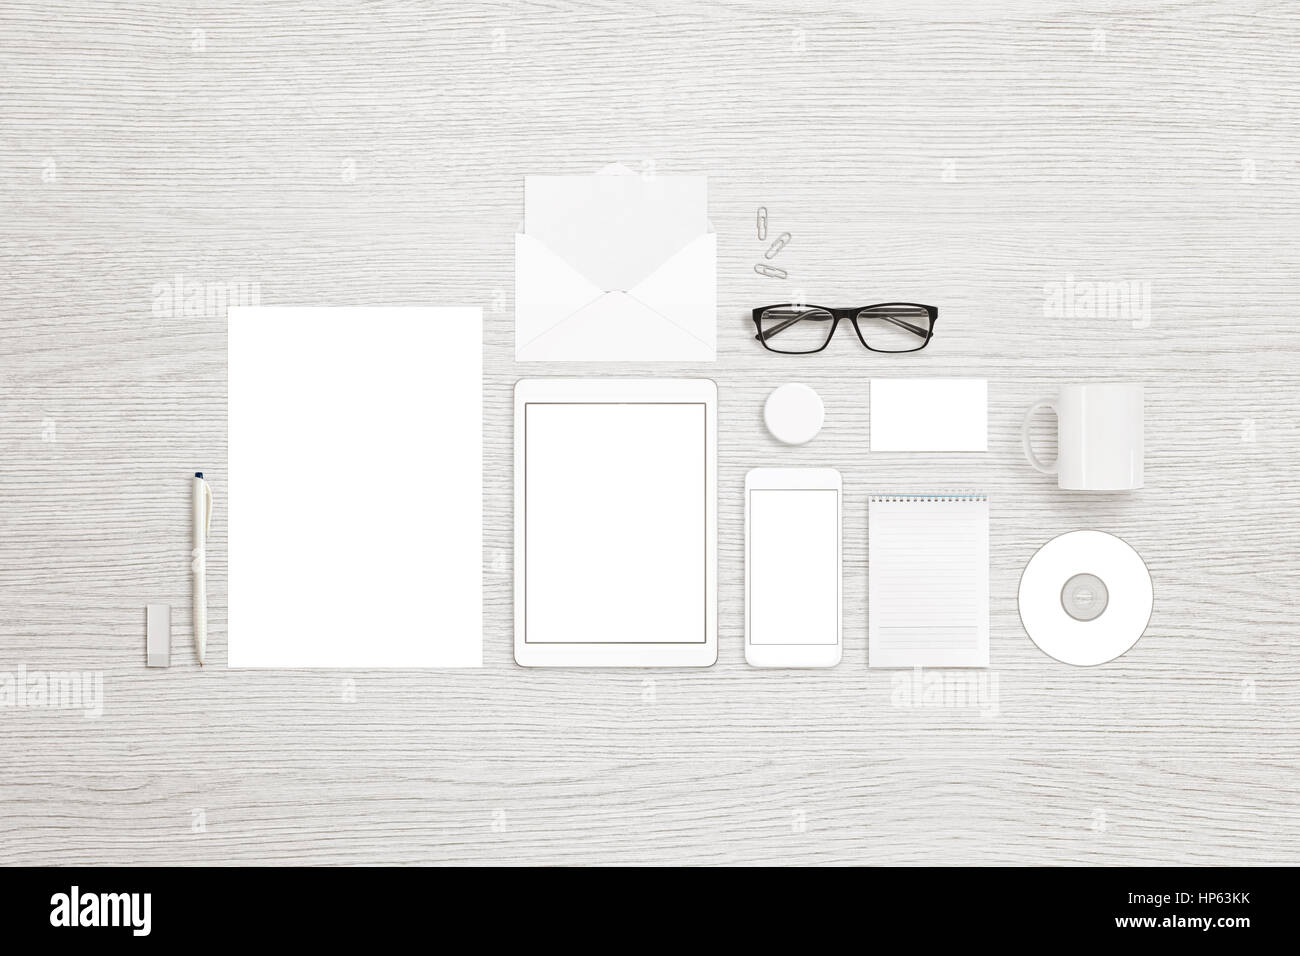 Top view of isolated stationary objects for branding, identity design presentation. White background. Stock Photo